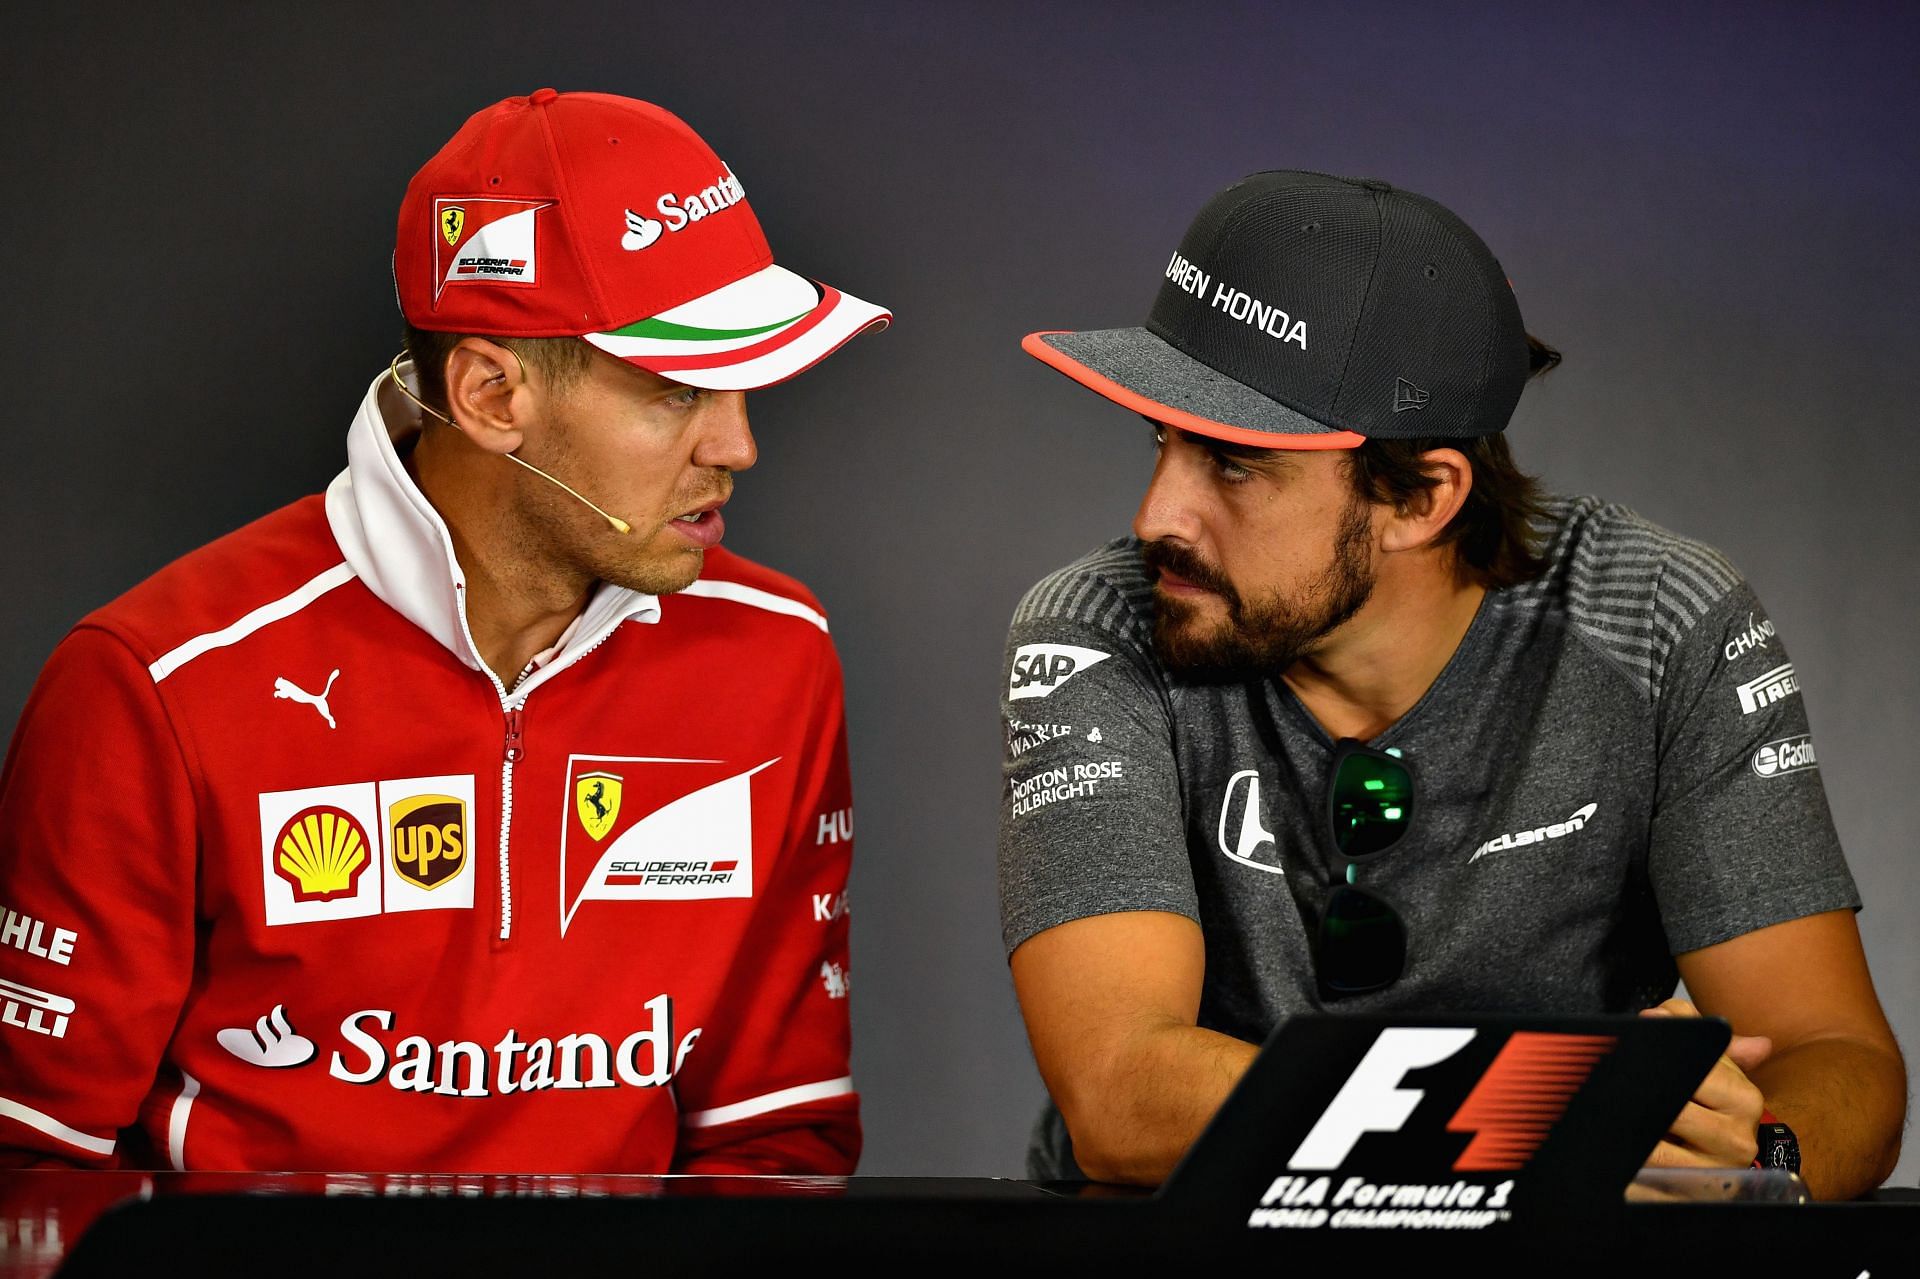 Fernando Alonso and Sebastian Vettel will be out of their contracts at the end of the 2022 season